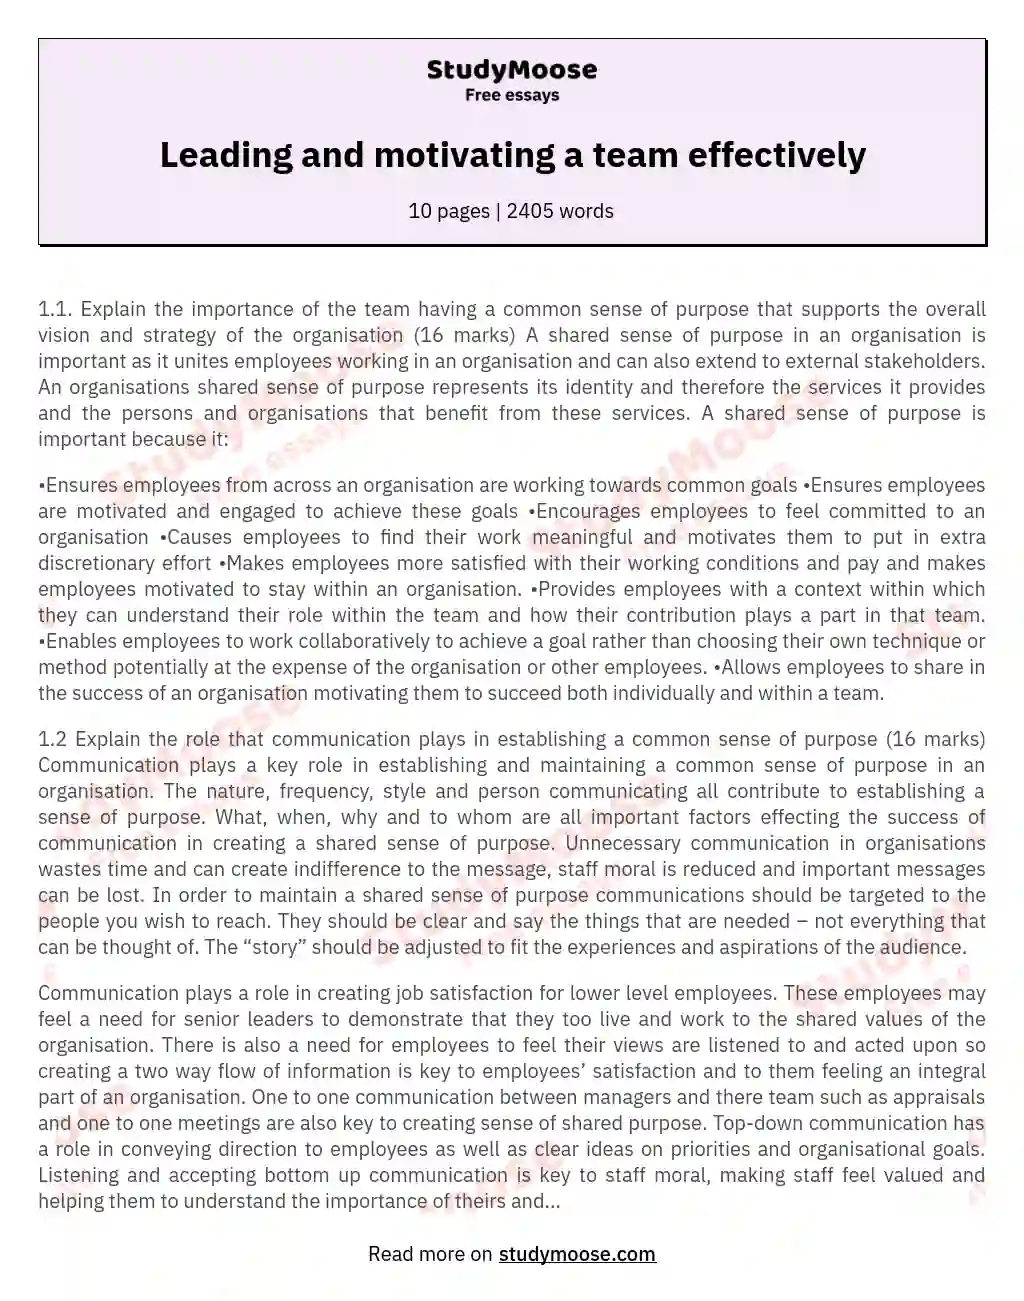 Leading and motivating a team effectively essay